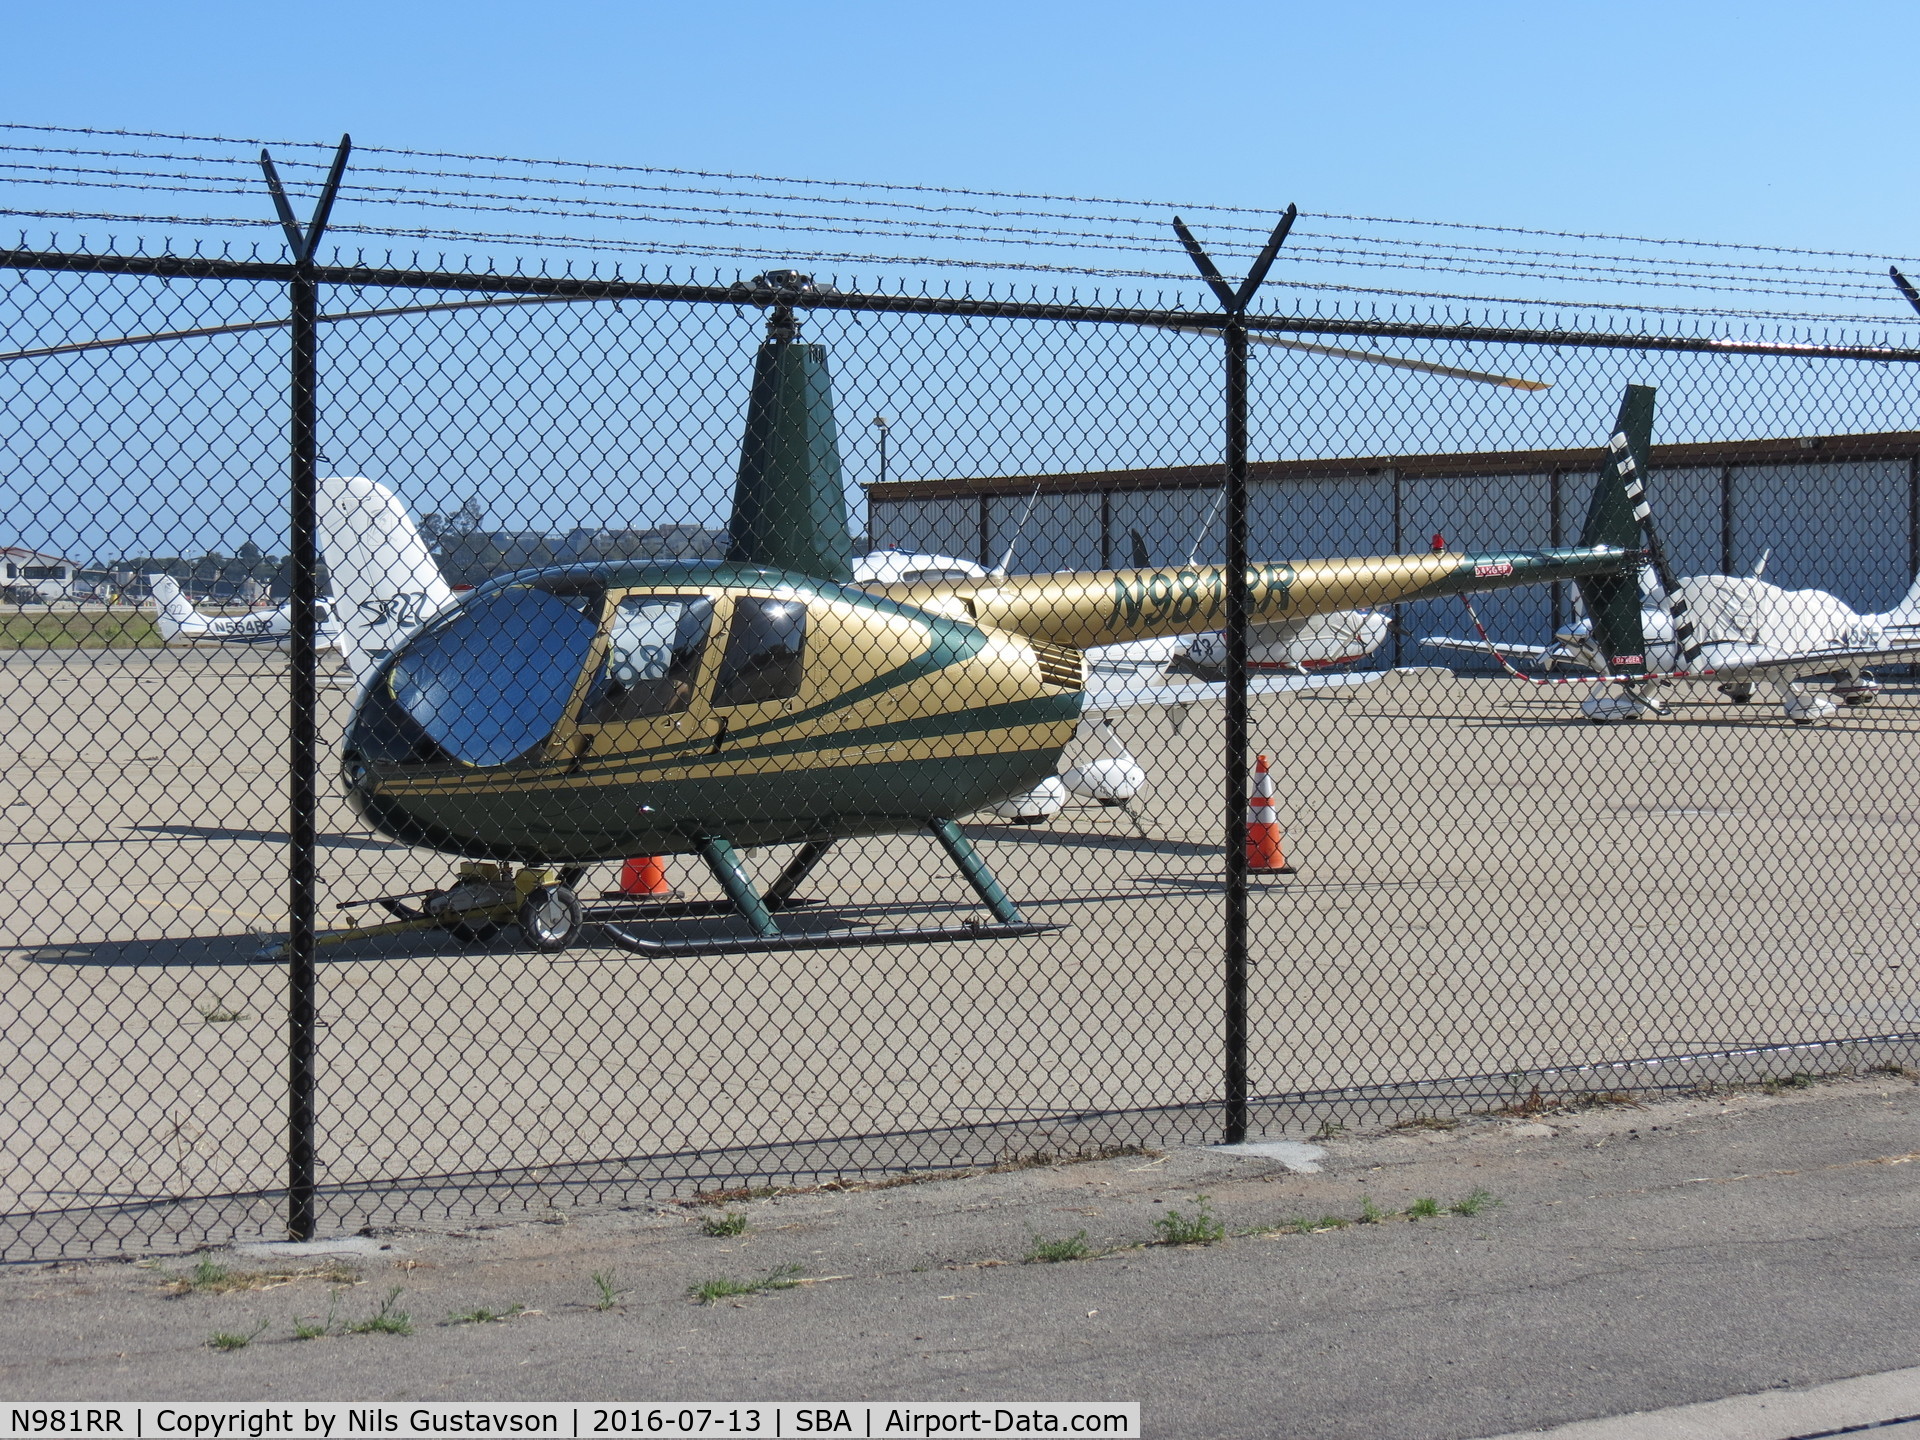 N981RR, 2001 Robinson R44 Raven C/N 0961, Parked at Santa Barbara Airport. Crashed in Santa Barbara, CA on 05/15/2017 while on a Sightseeing Tour. All three people aboard survived.